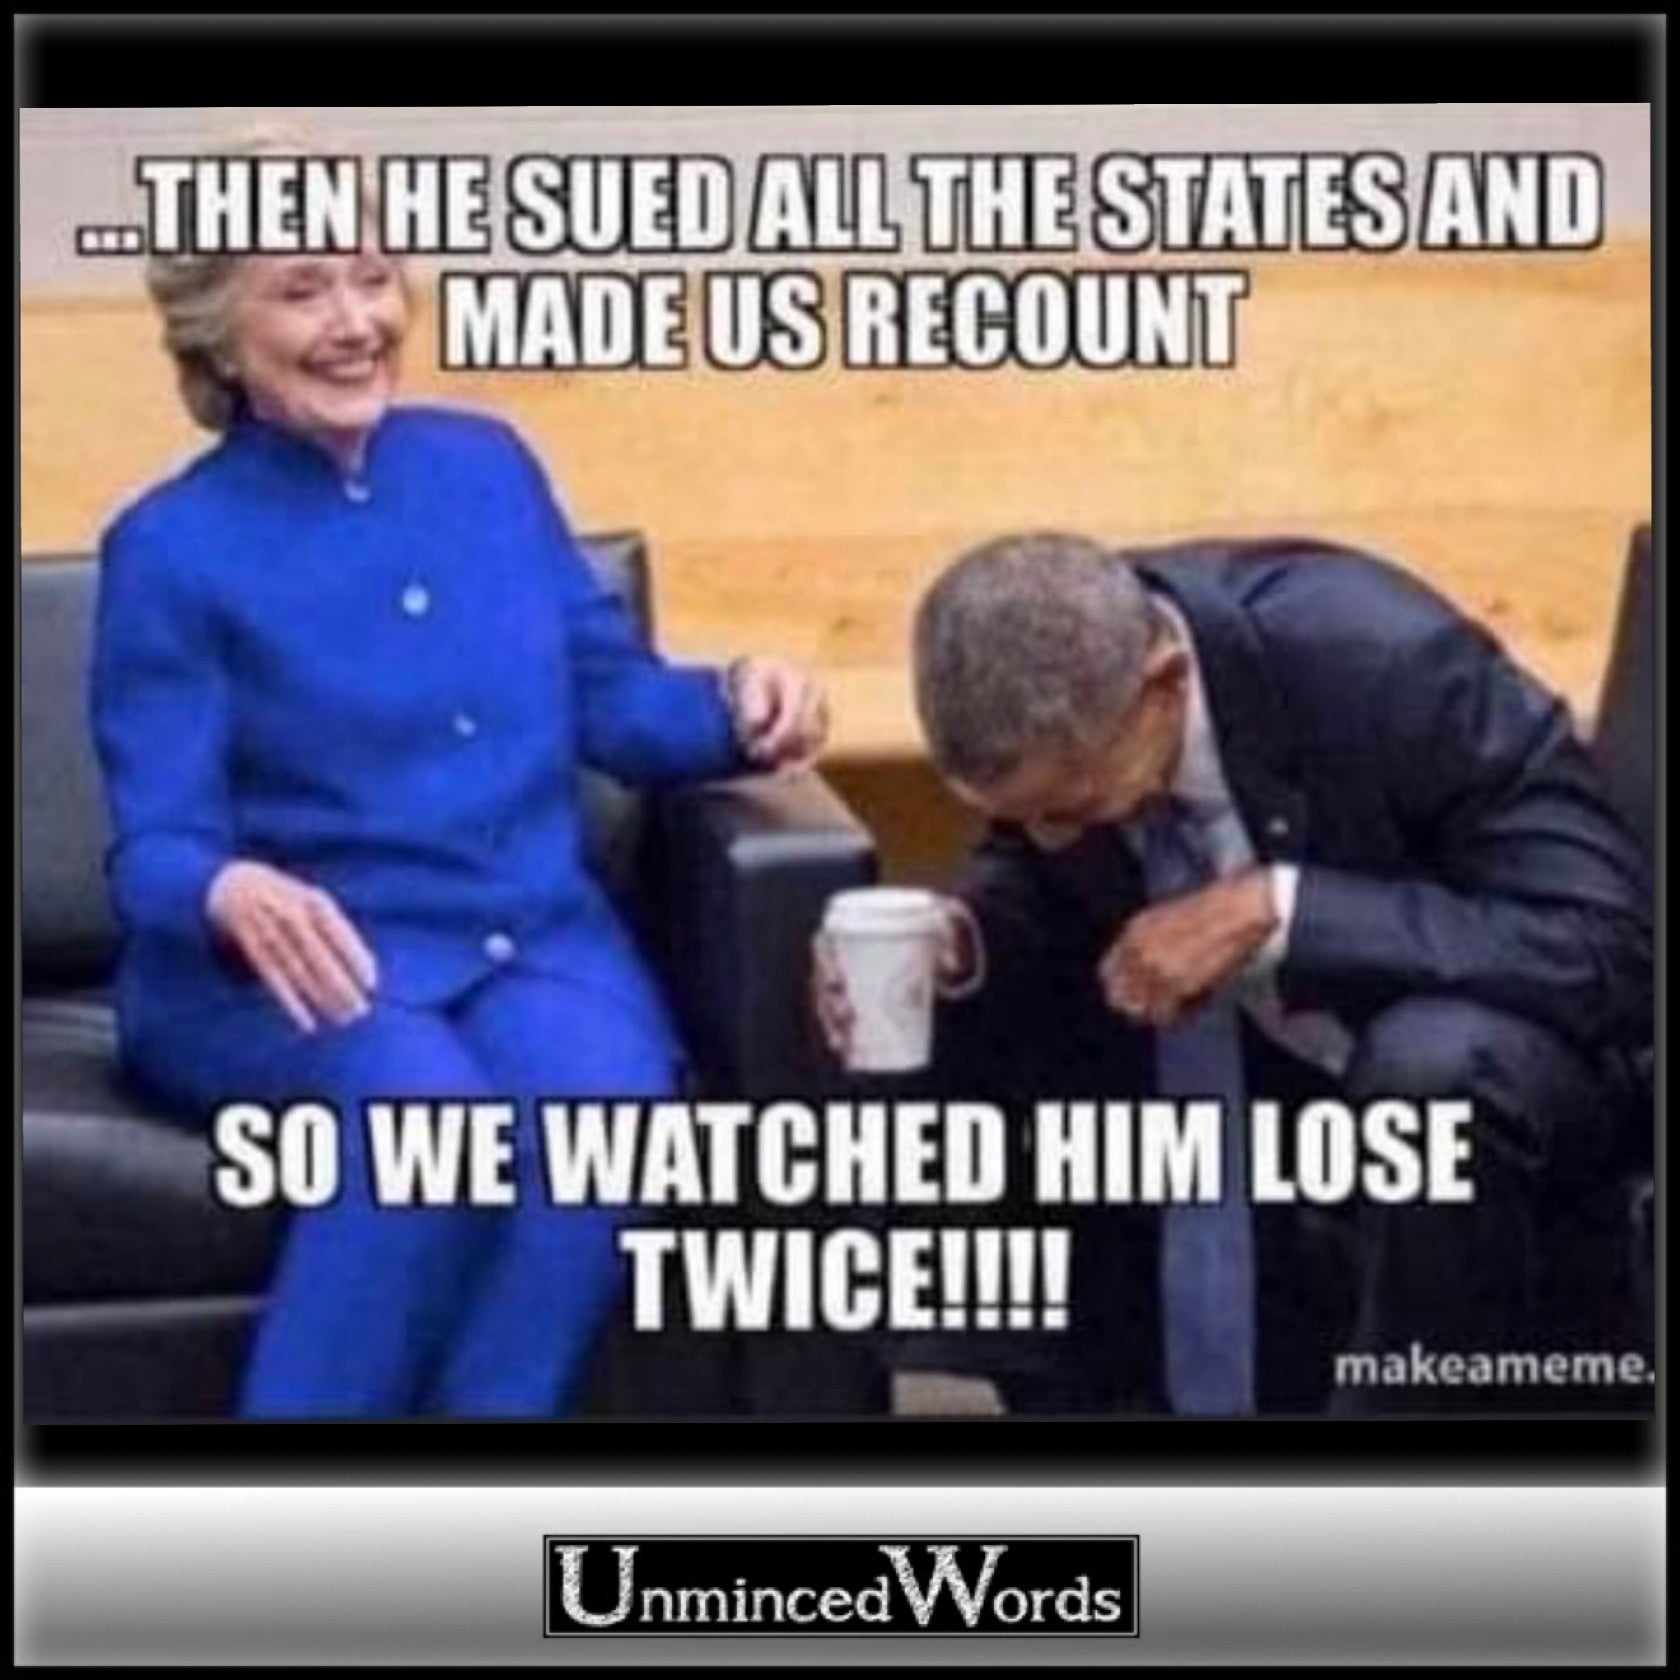 Clinton & Obama meme is your Saturday mood.